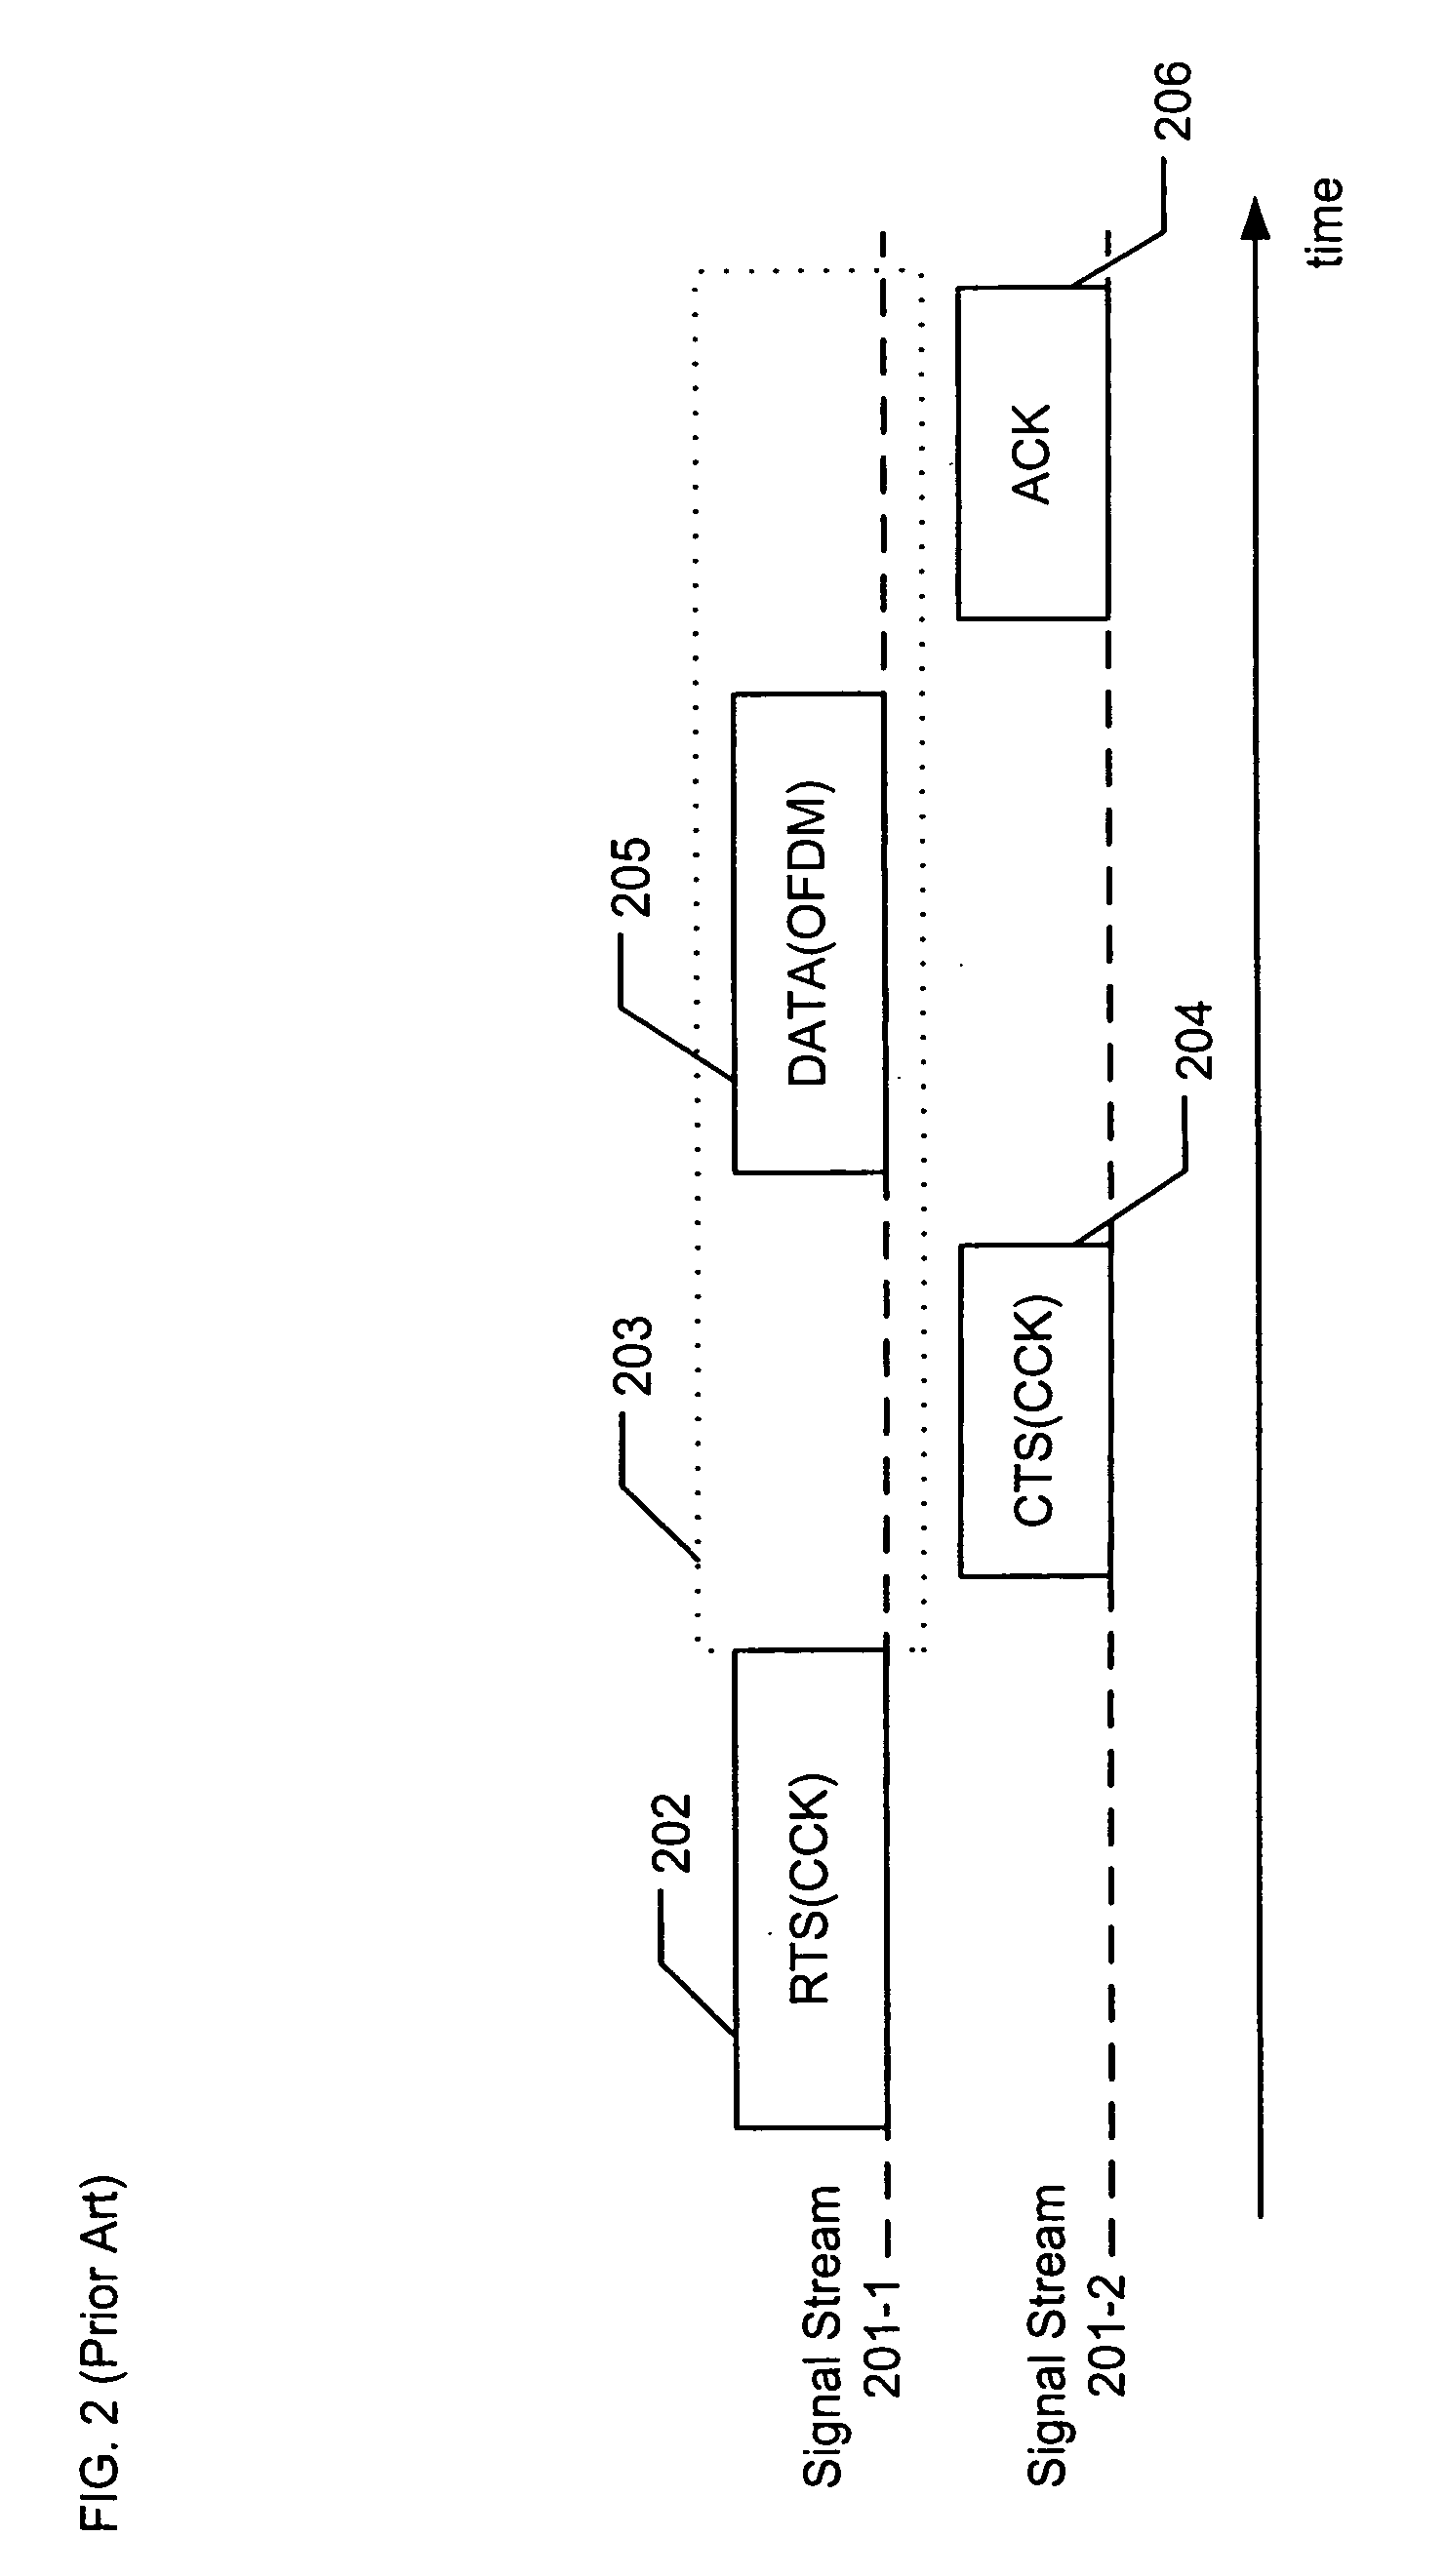 Transmission protection for communications networks having stations operating with different modulation formats